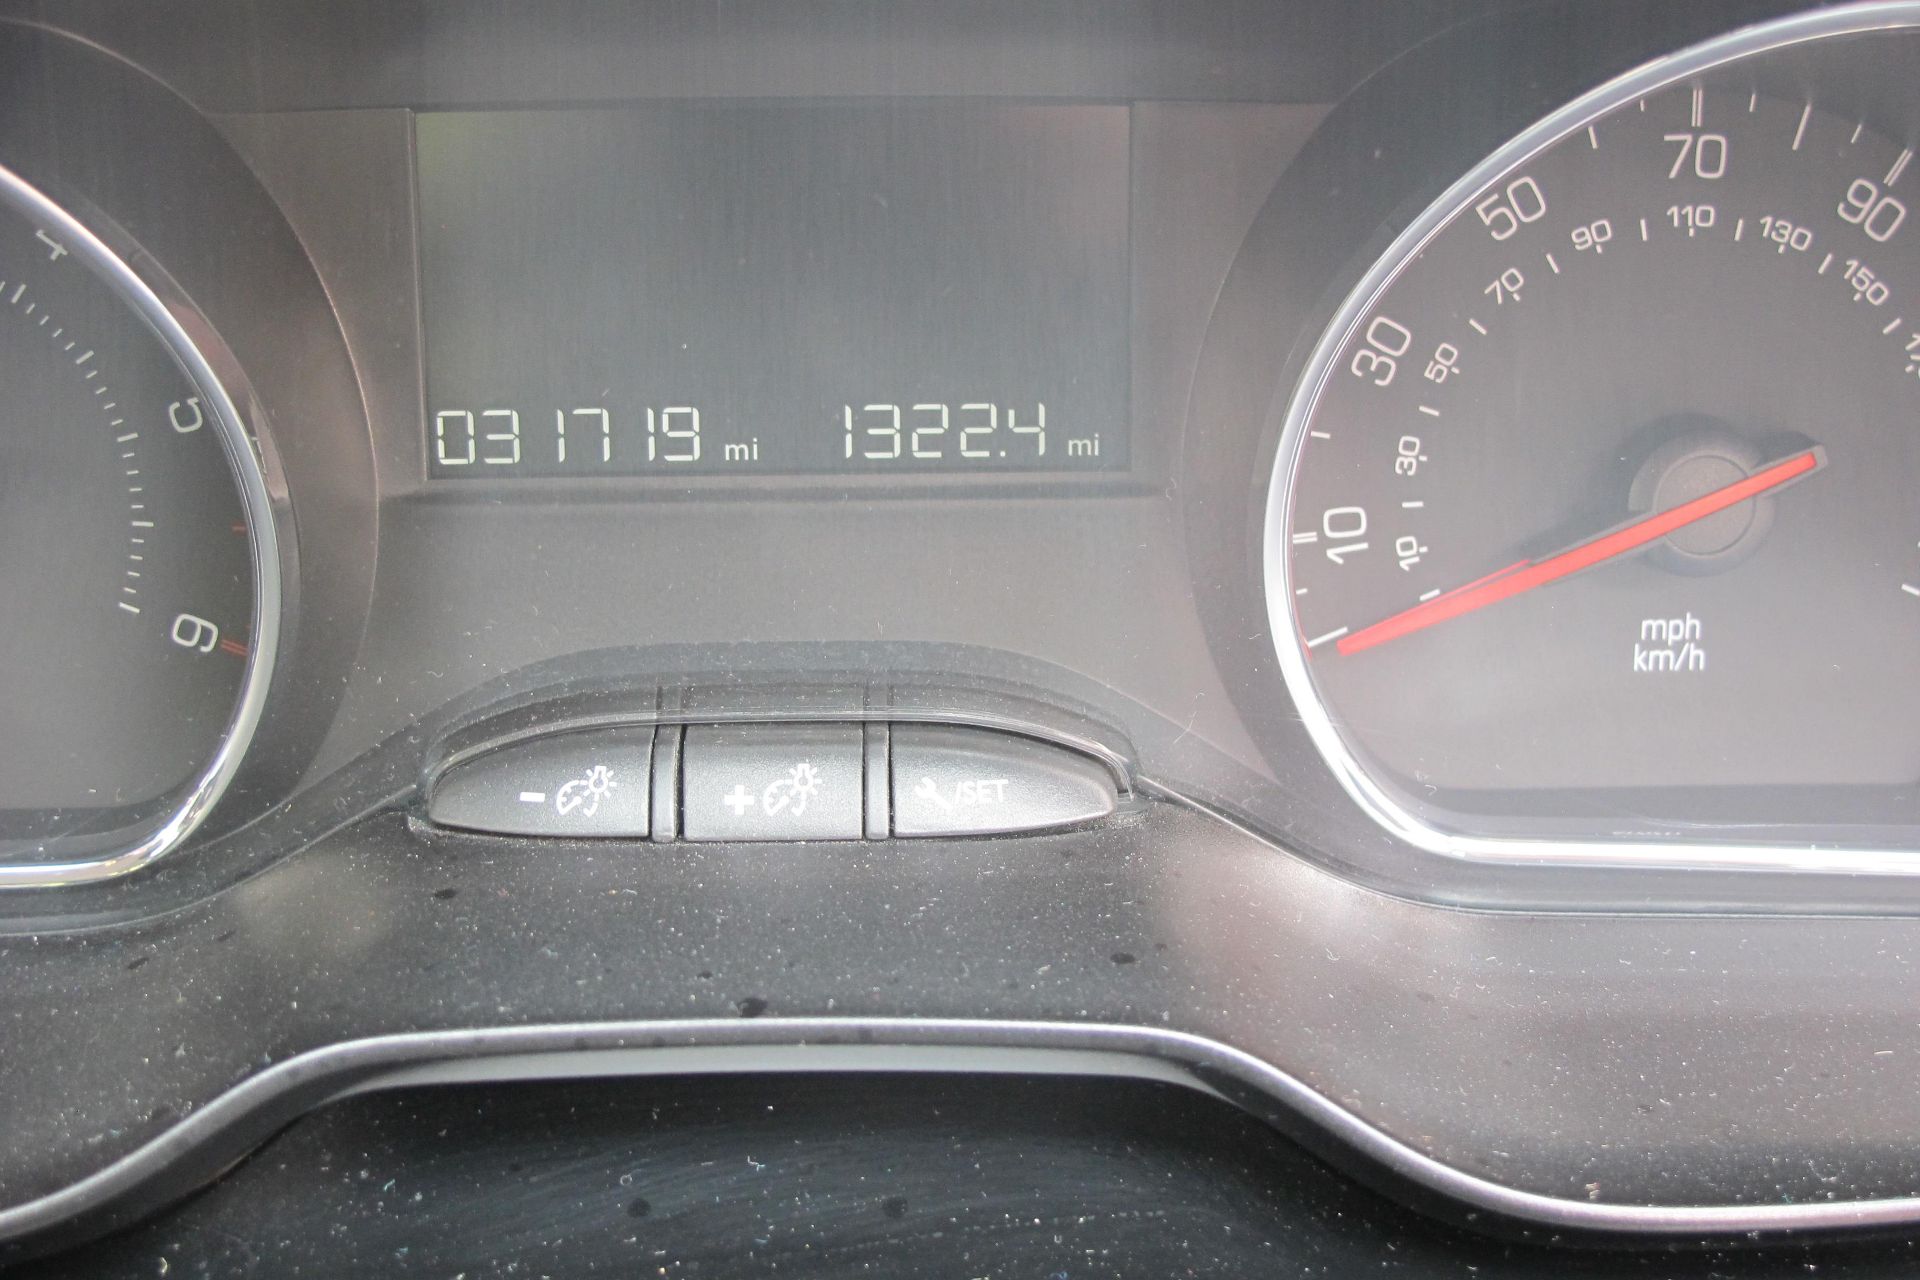 Peugeot 208 Active HDI 5 door hatch. 1398cc. Full service history, Registration FH14 EUN. Odometer - Image 6 of 18